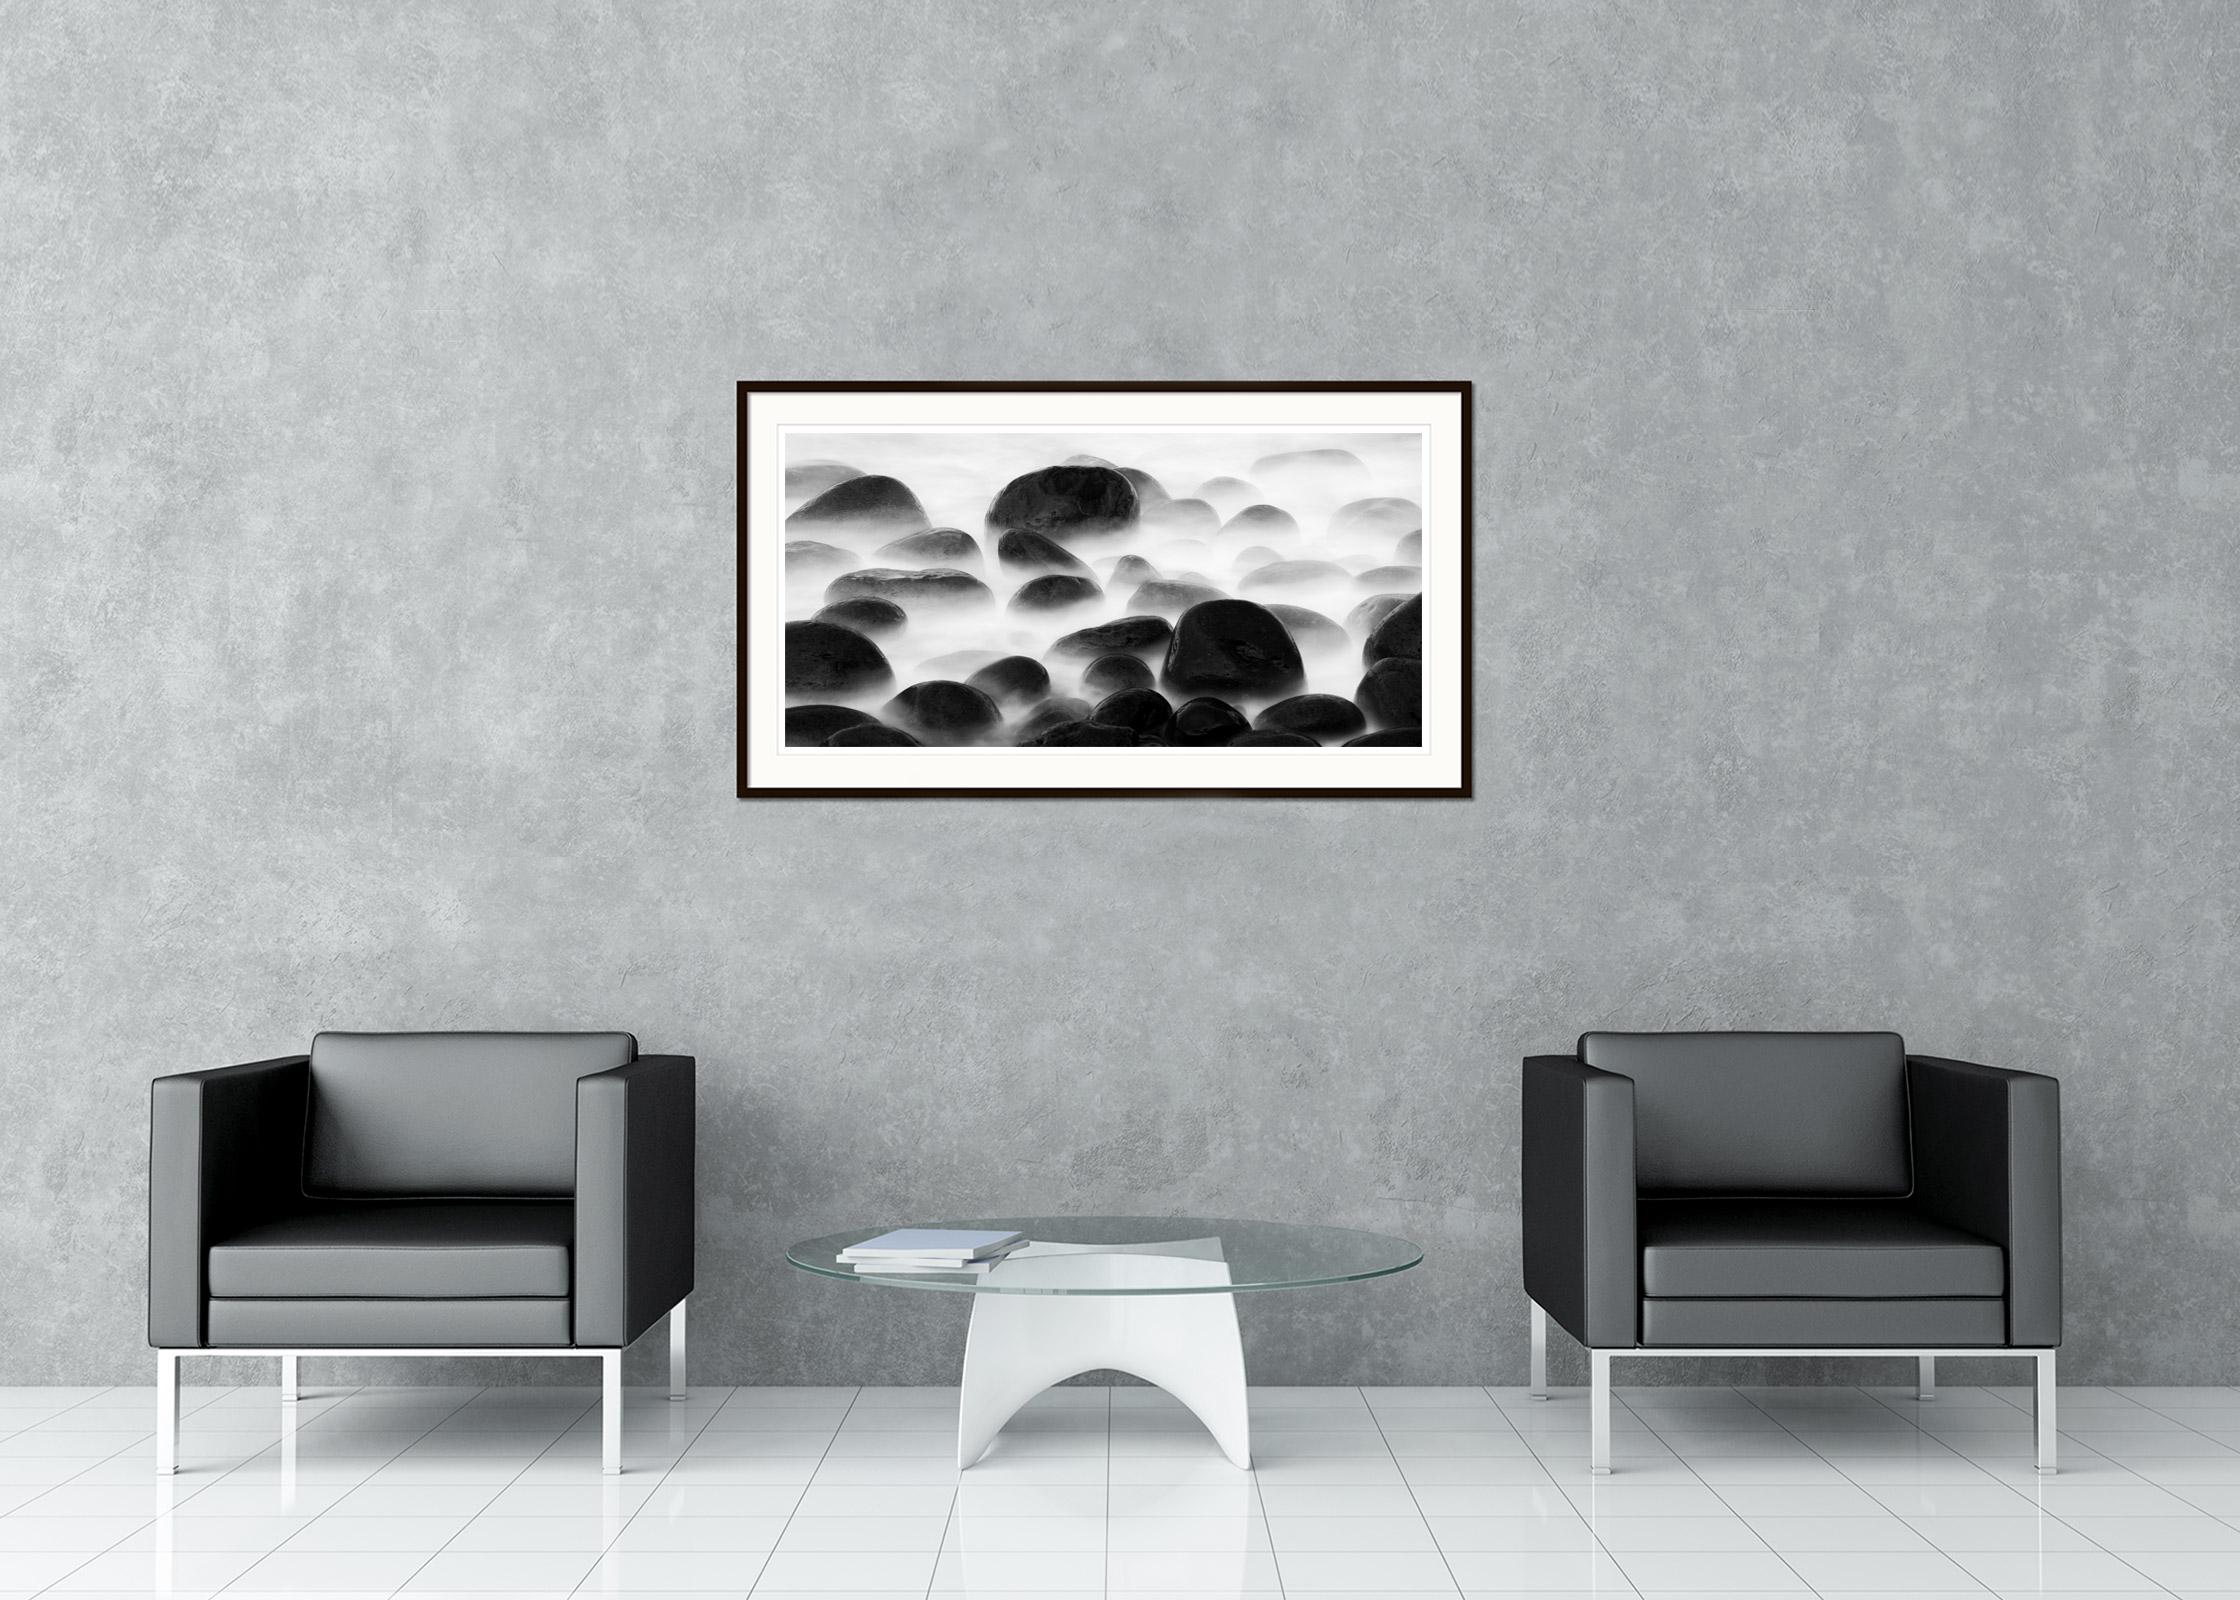 Black and white fine art long exposure waterscape - landscape photography. Big black stones on the shore in madeira, Portugal. Archival pigment ink print as part of a limited edition of 5. All Gerald Berghammer prints are made to order in limited